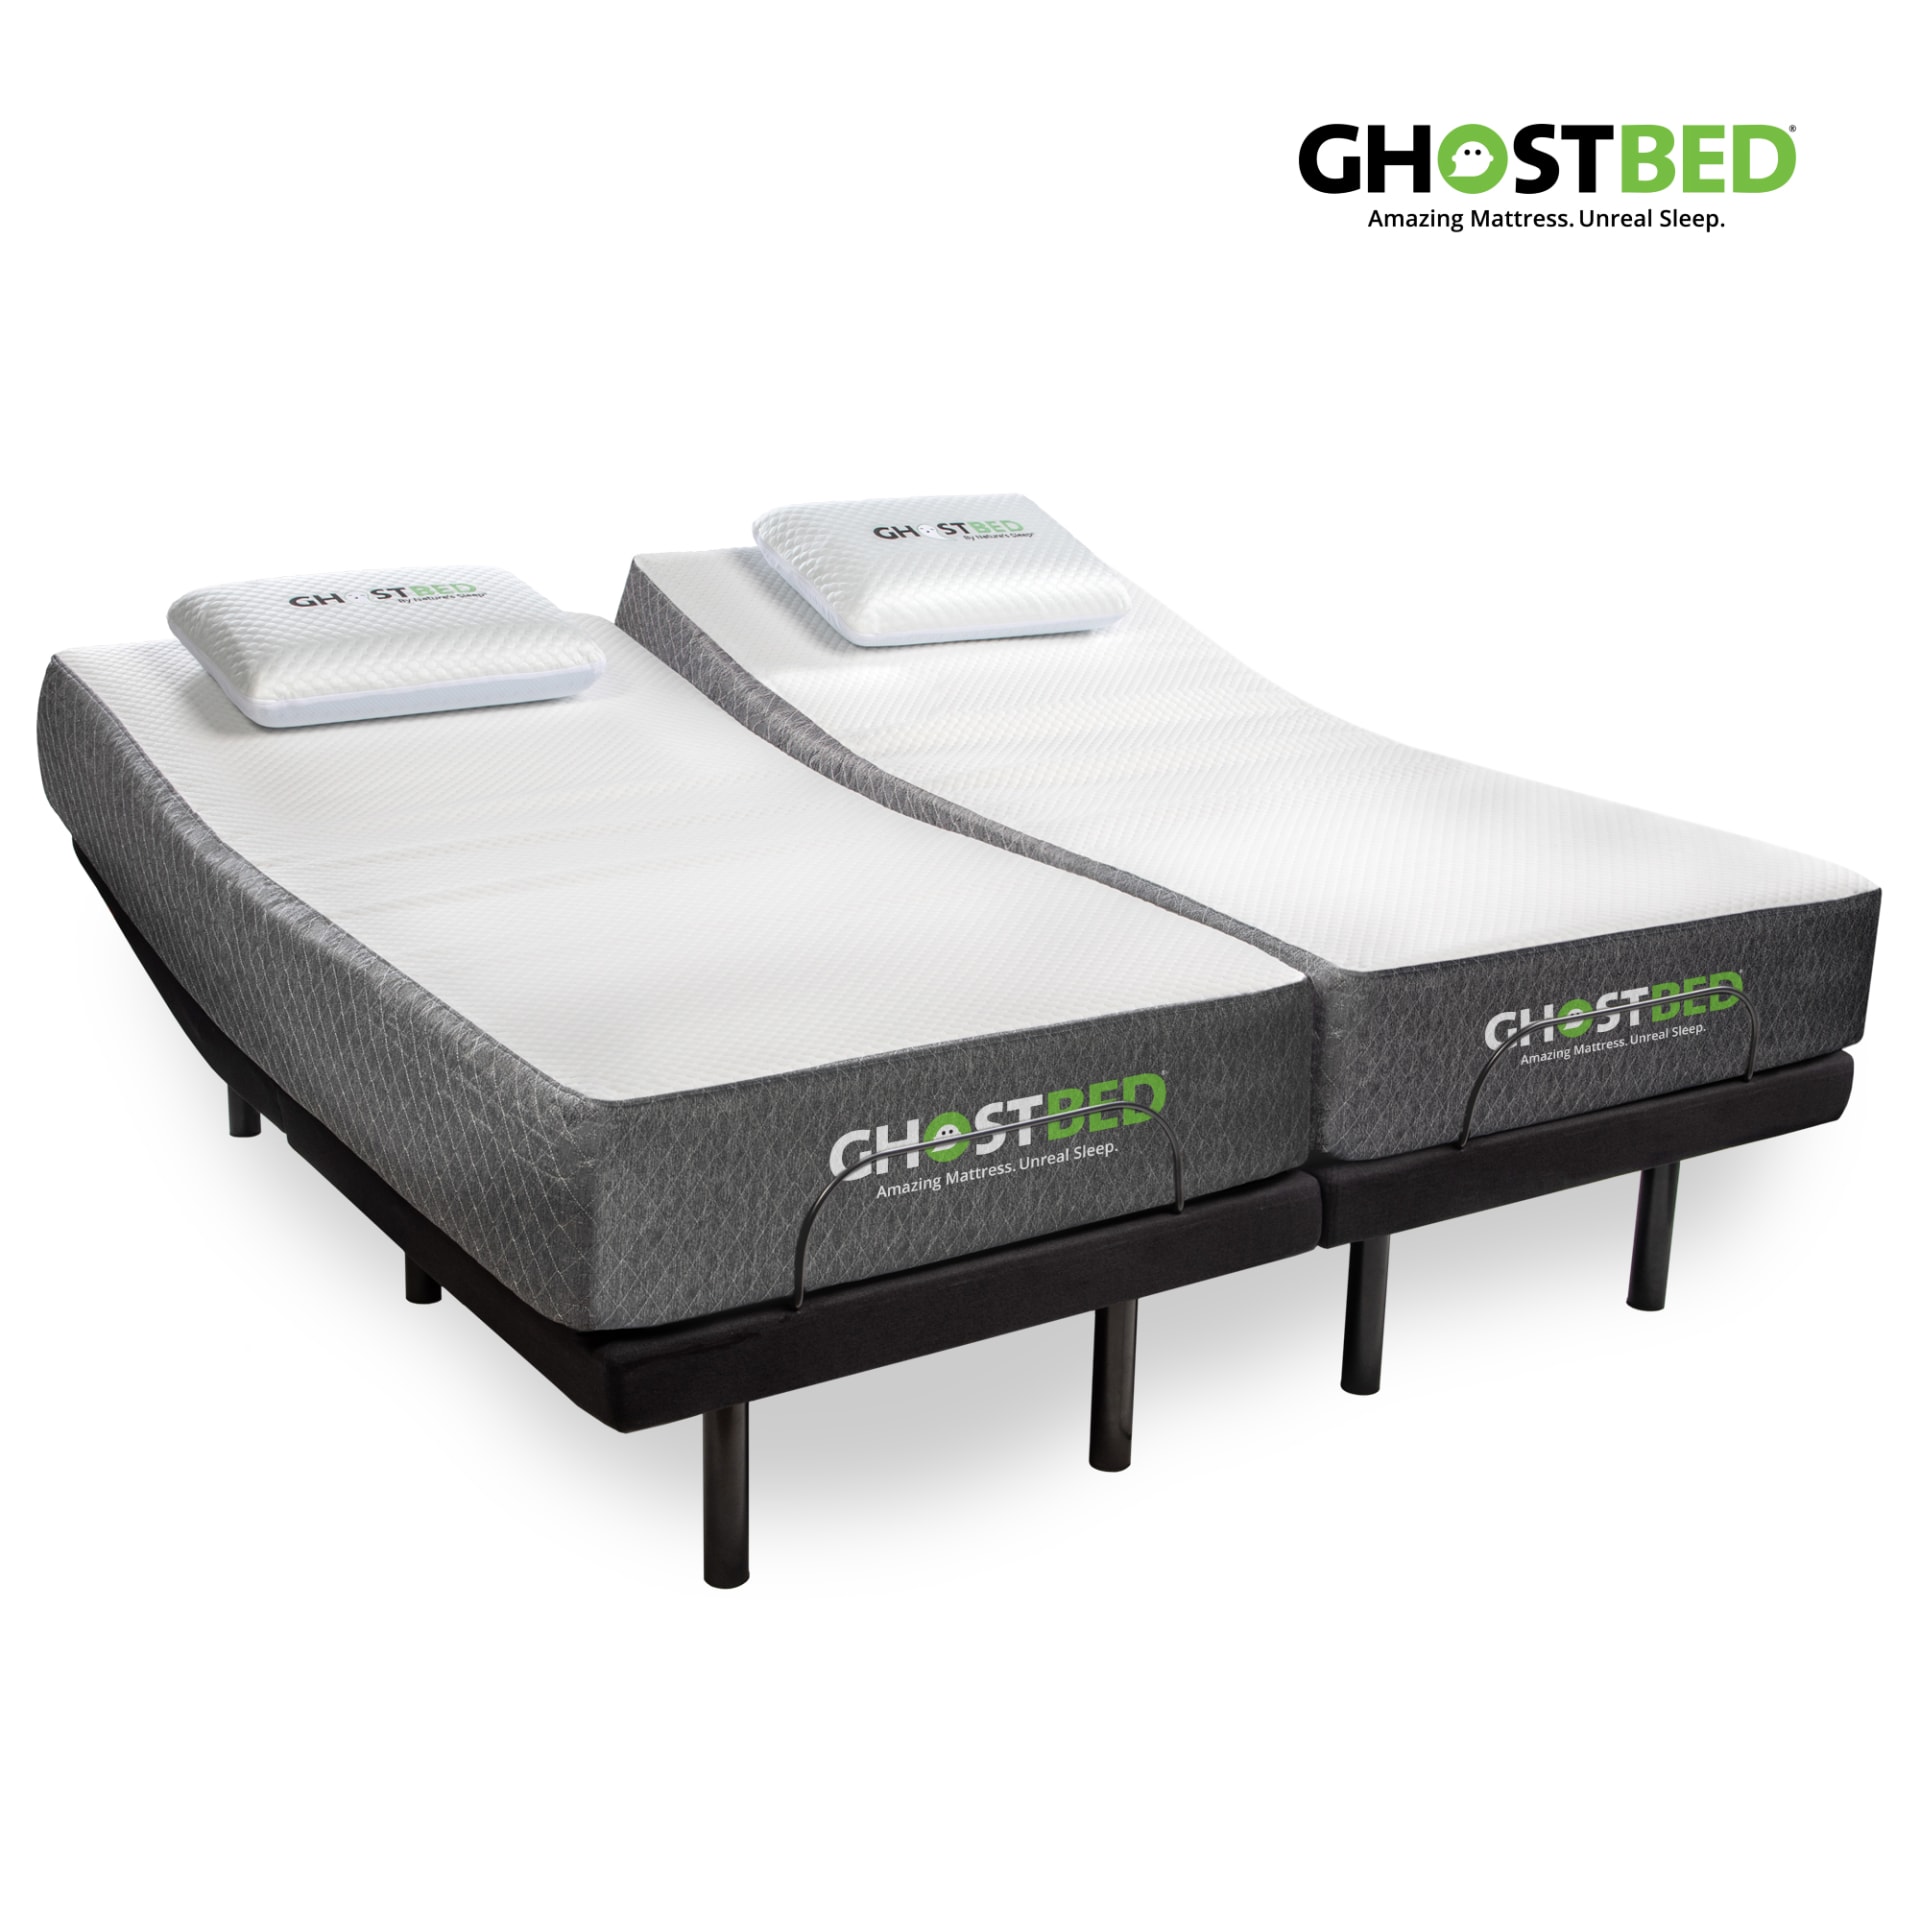 Ghostbed 11 Memory Foam Mattress With, Adjustable King Beds With Mattress